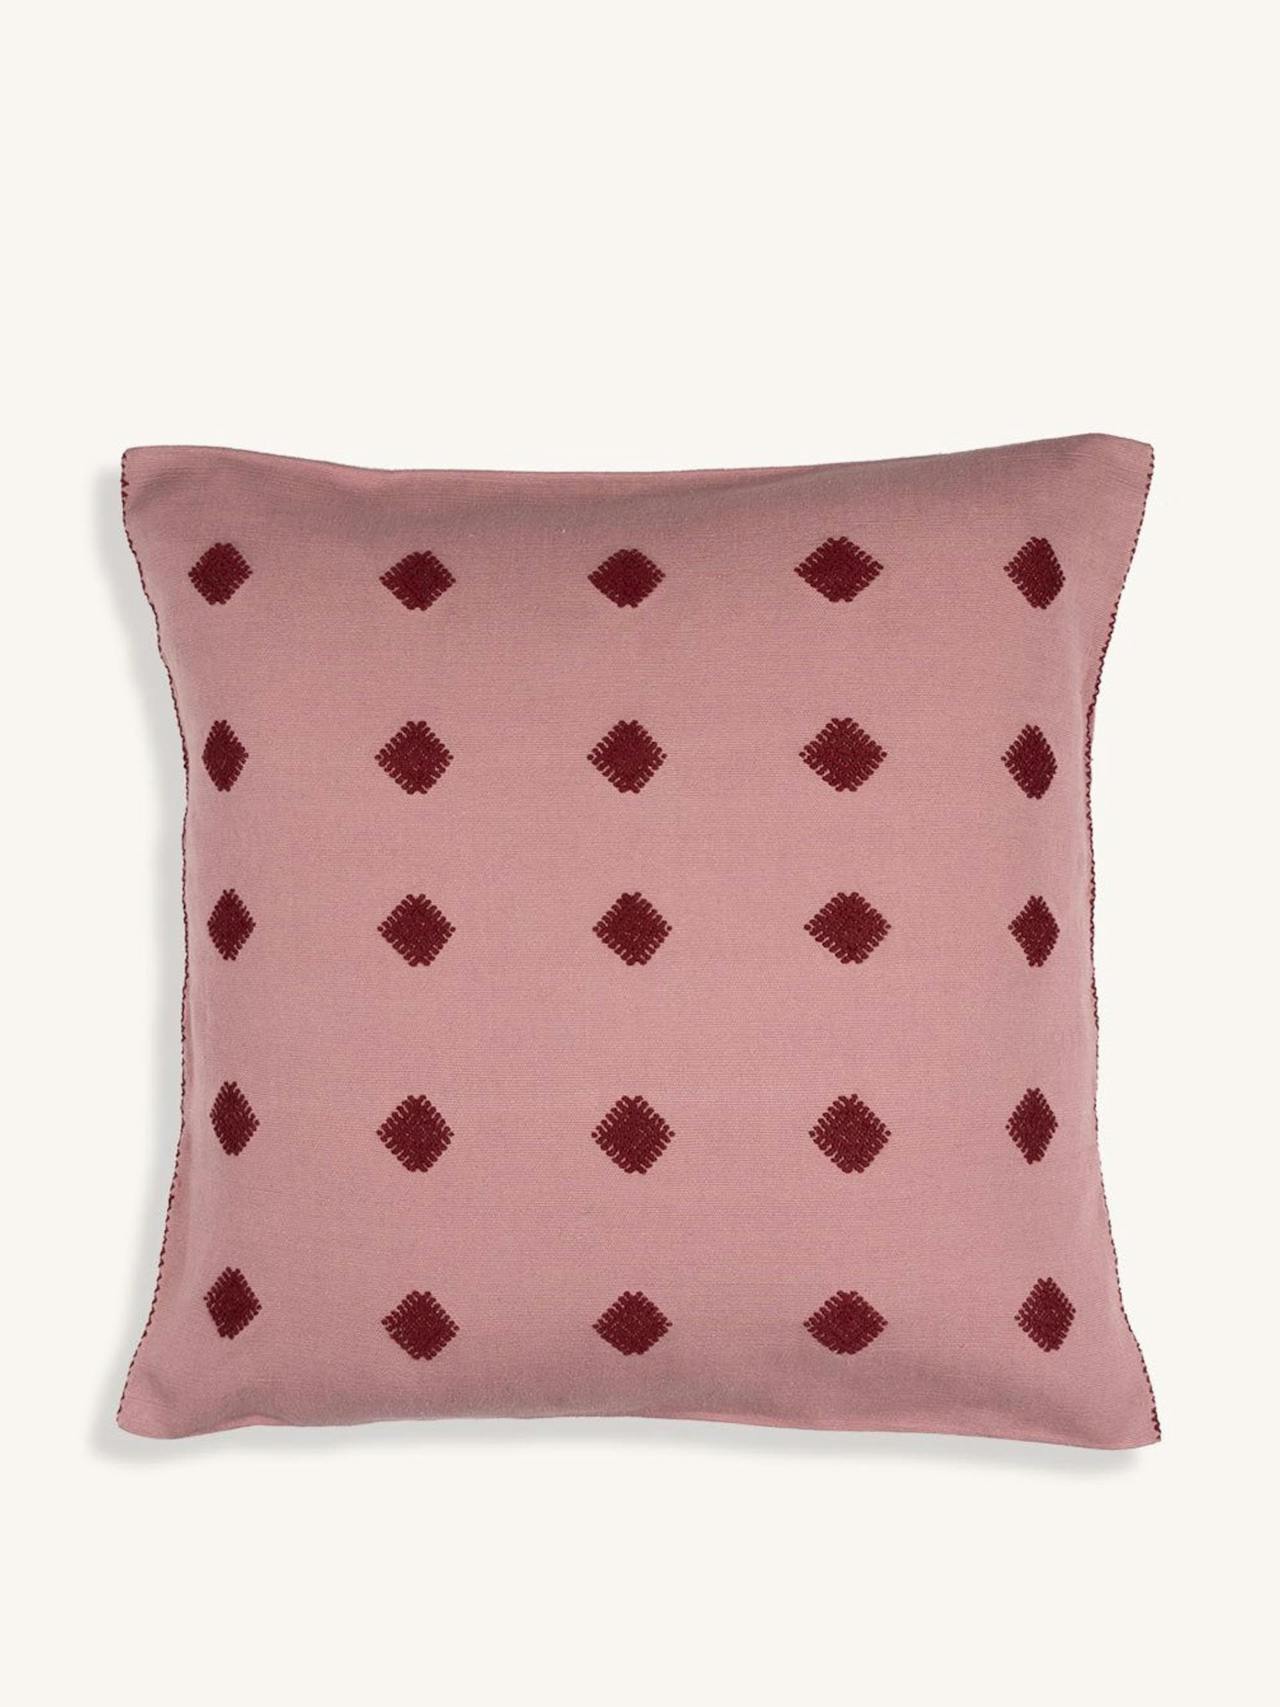 Pink The Path Of The Sun handwoven cushion